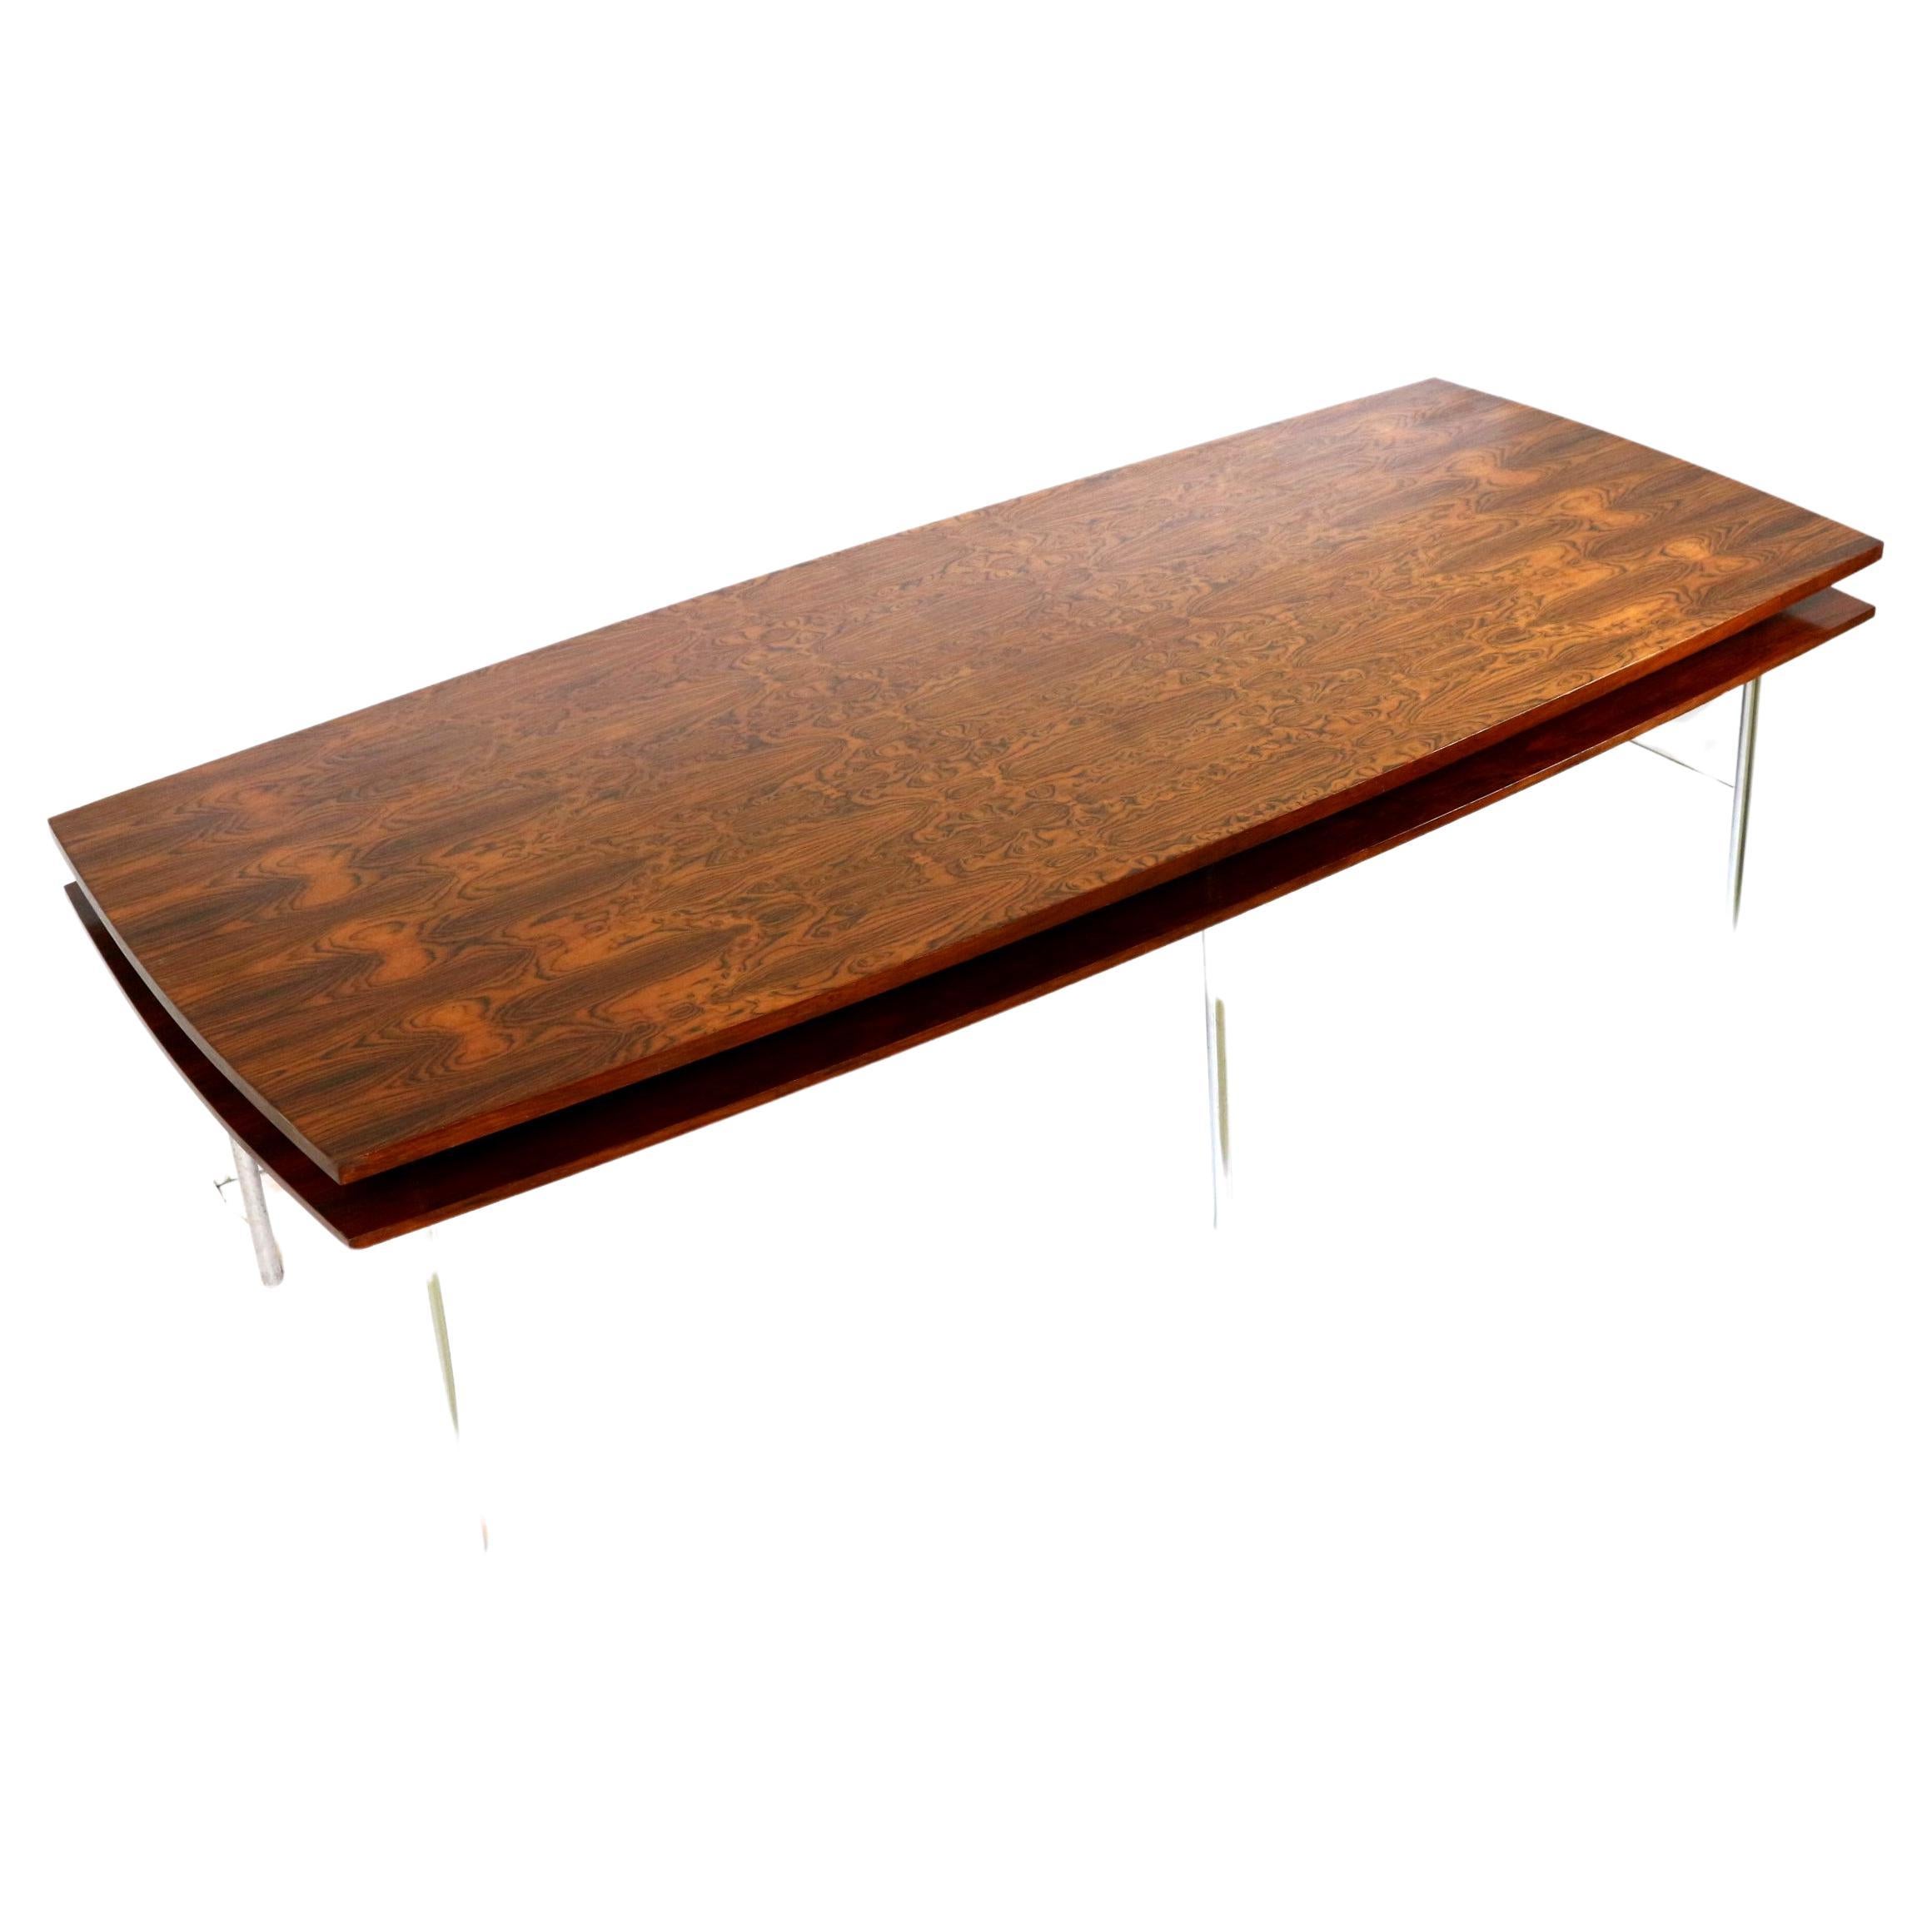 Large vintage rosewood conference table / dining table made in the 1960s For Sale